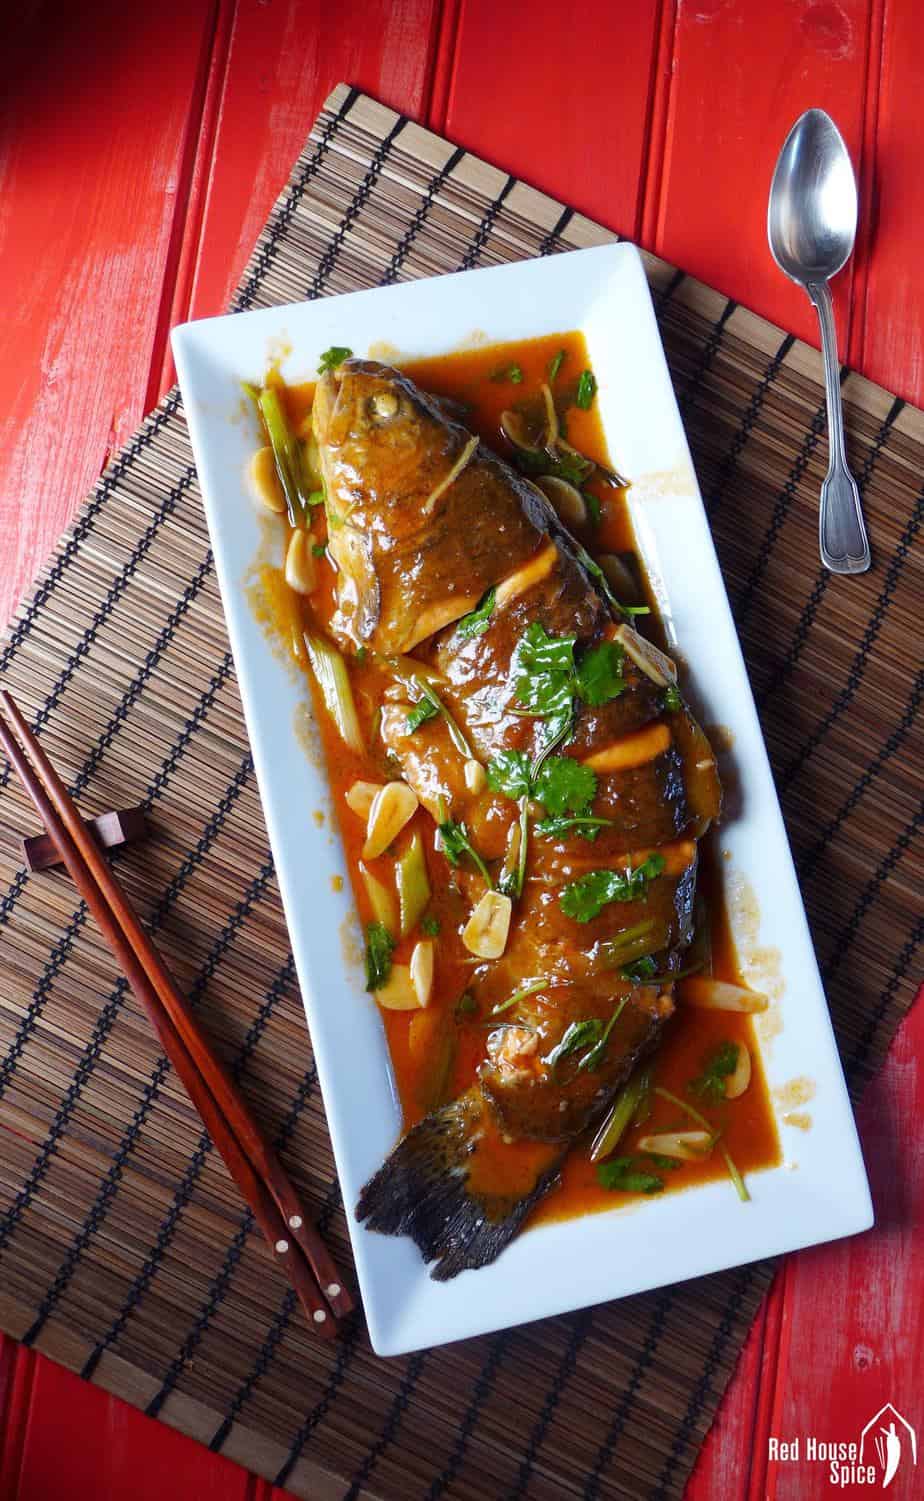 A whole fish cooked with sweet & sour sauce